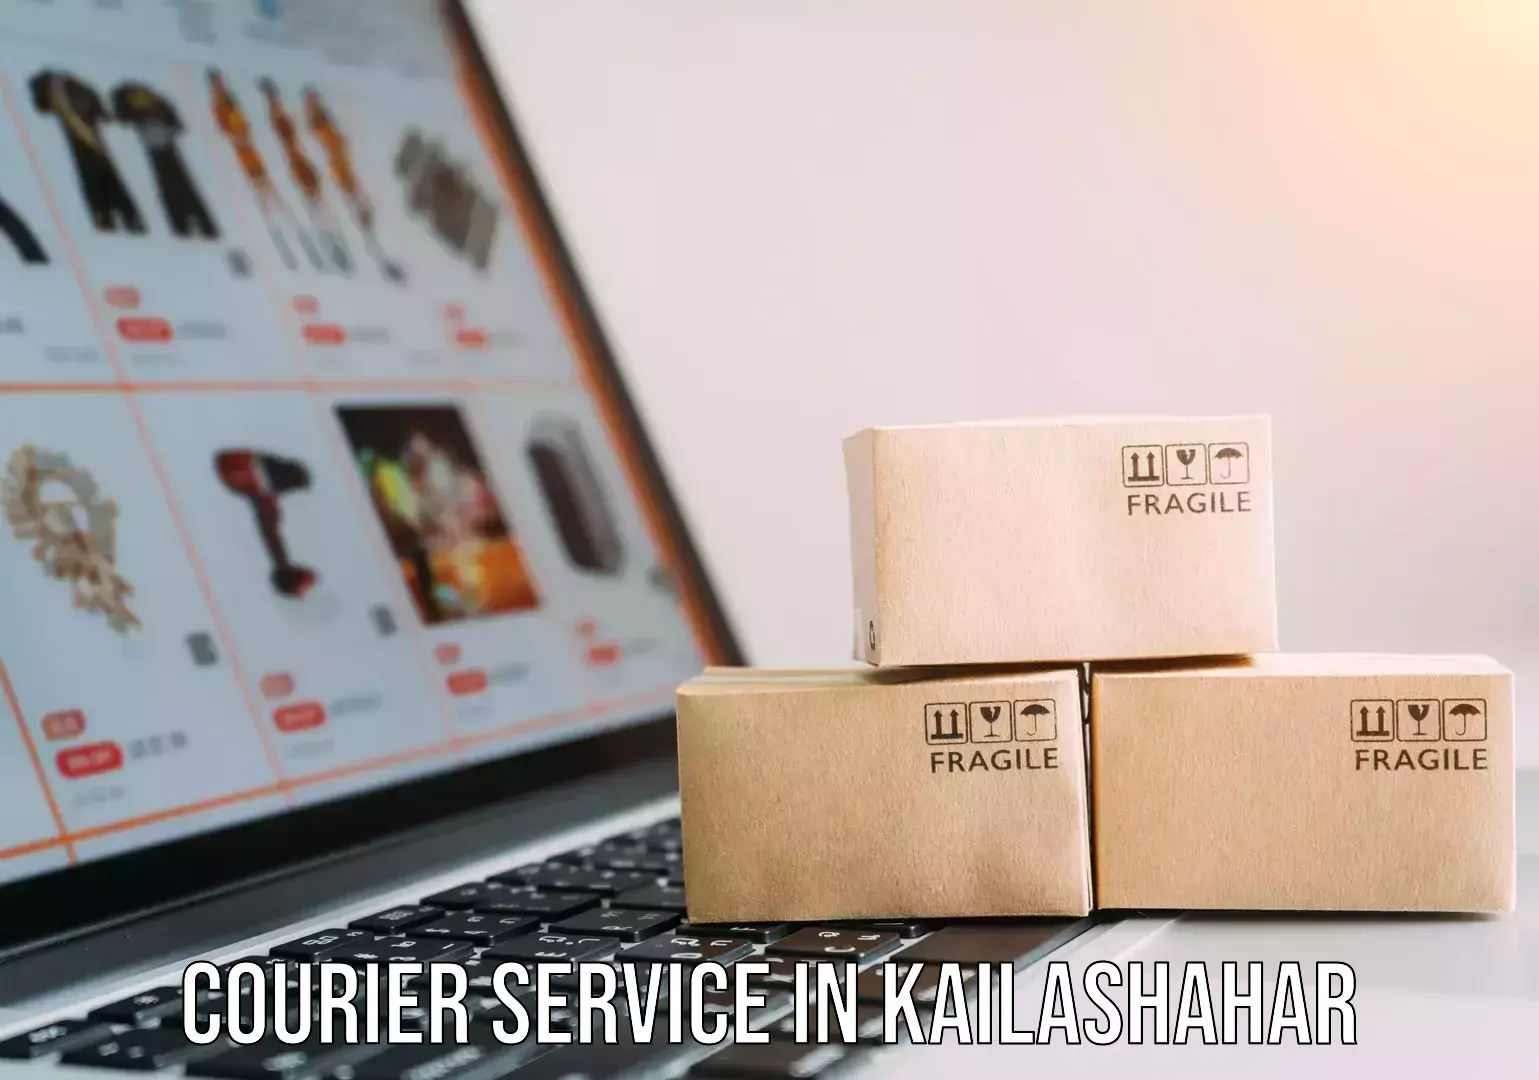 Business logistics support in Kailashahar